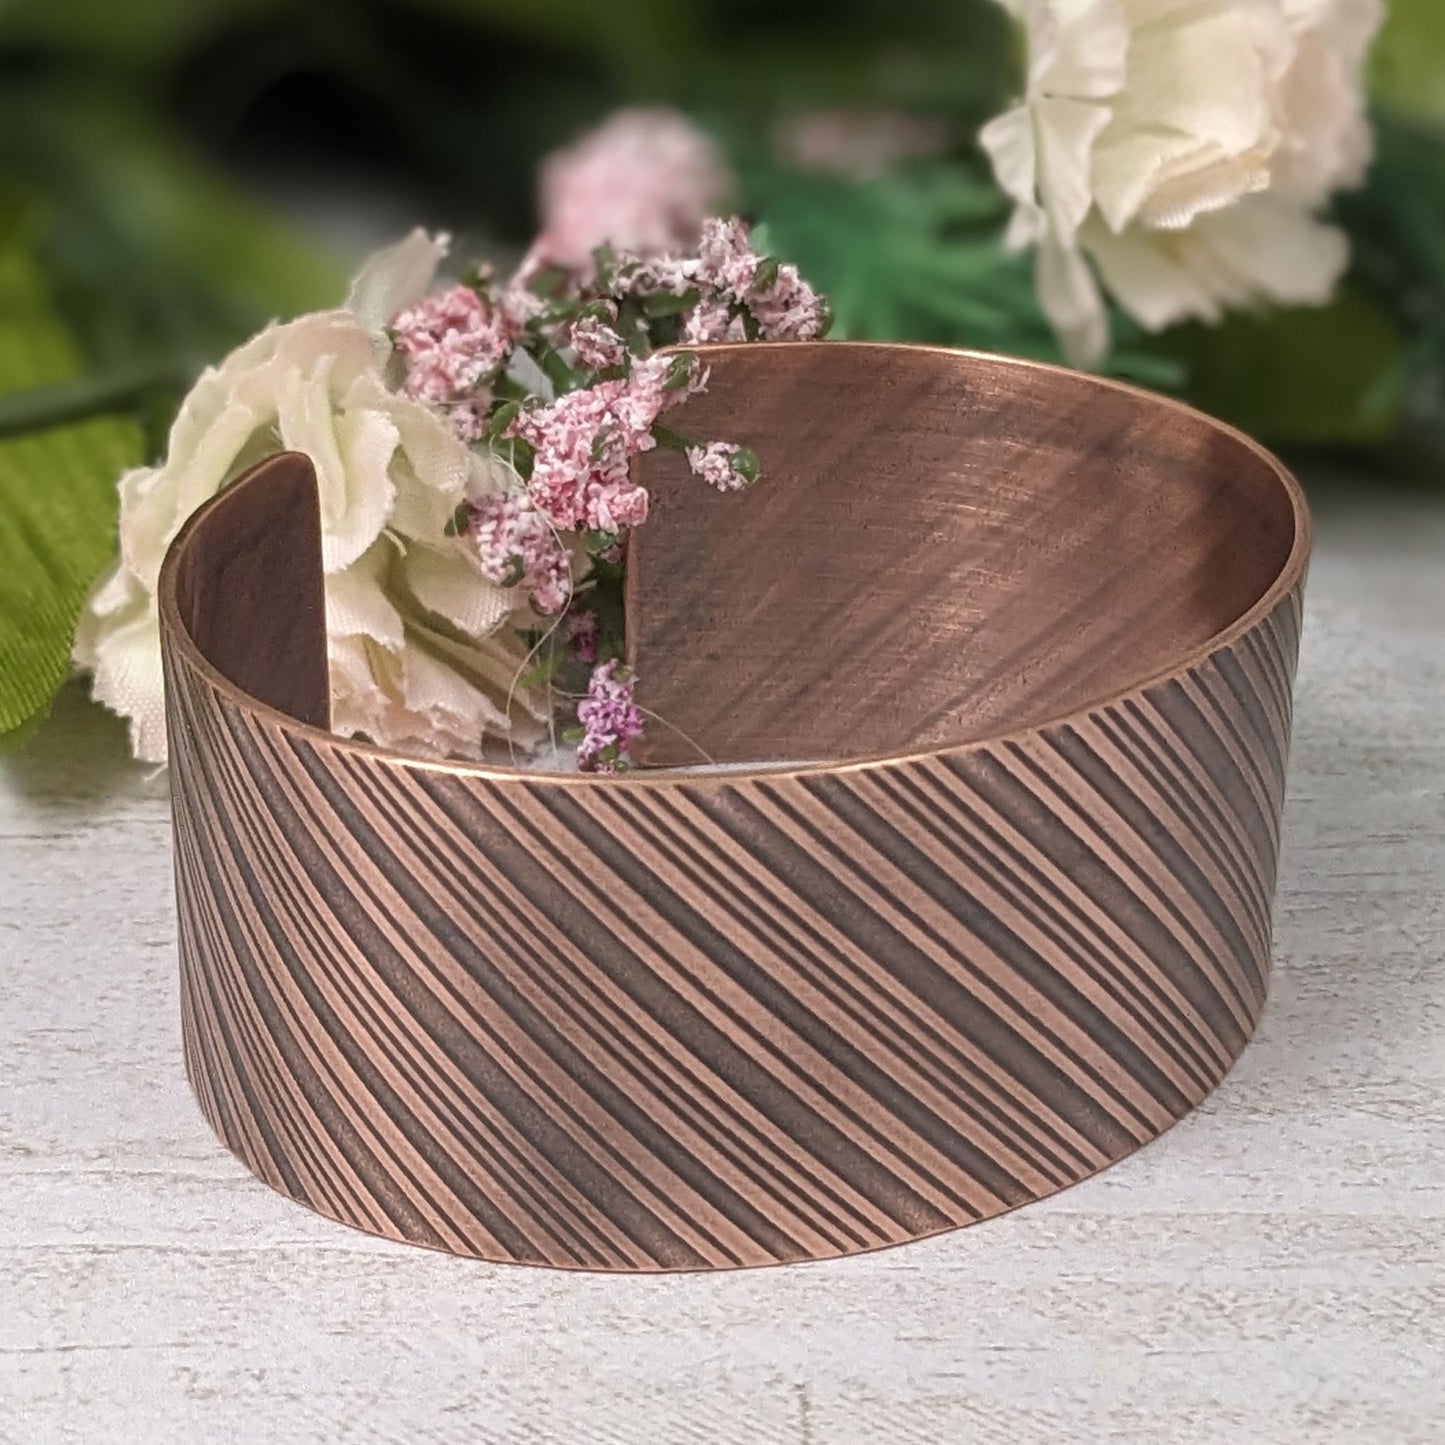 copper cuff bracelet with diagonal stripes like found on candy canes